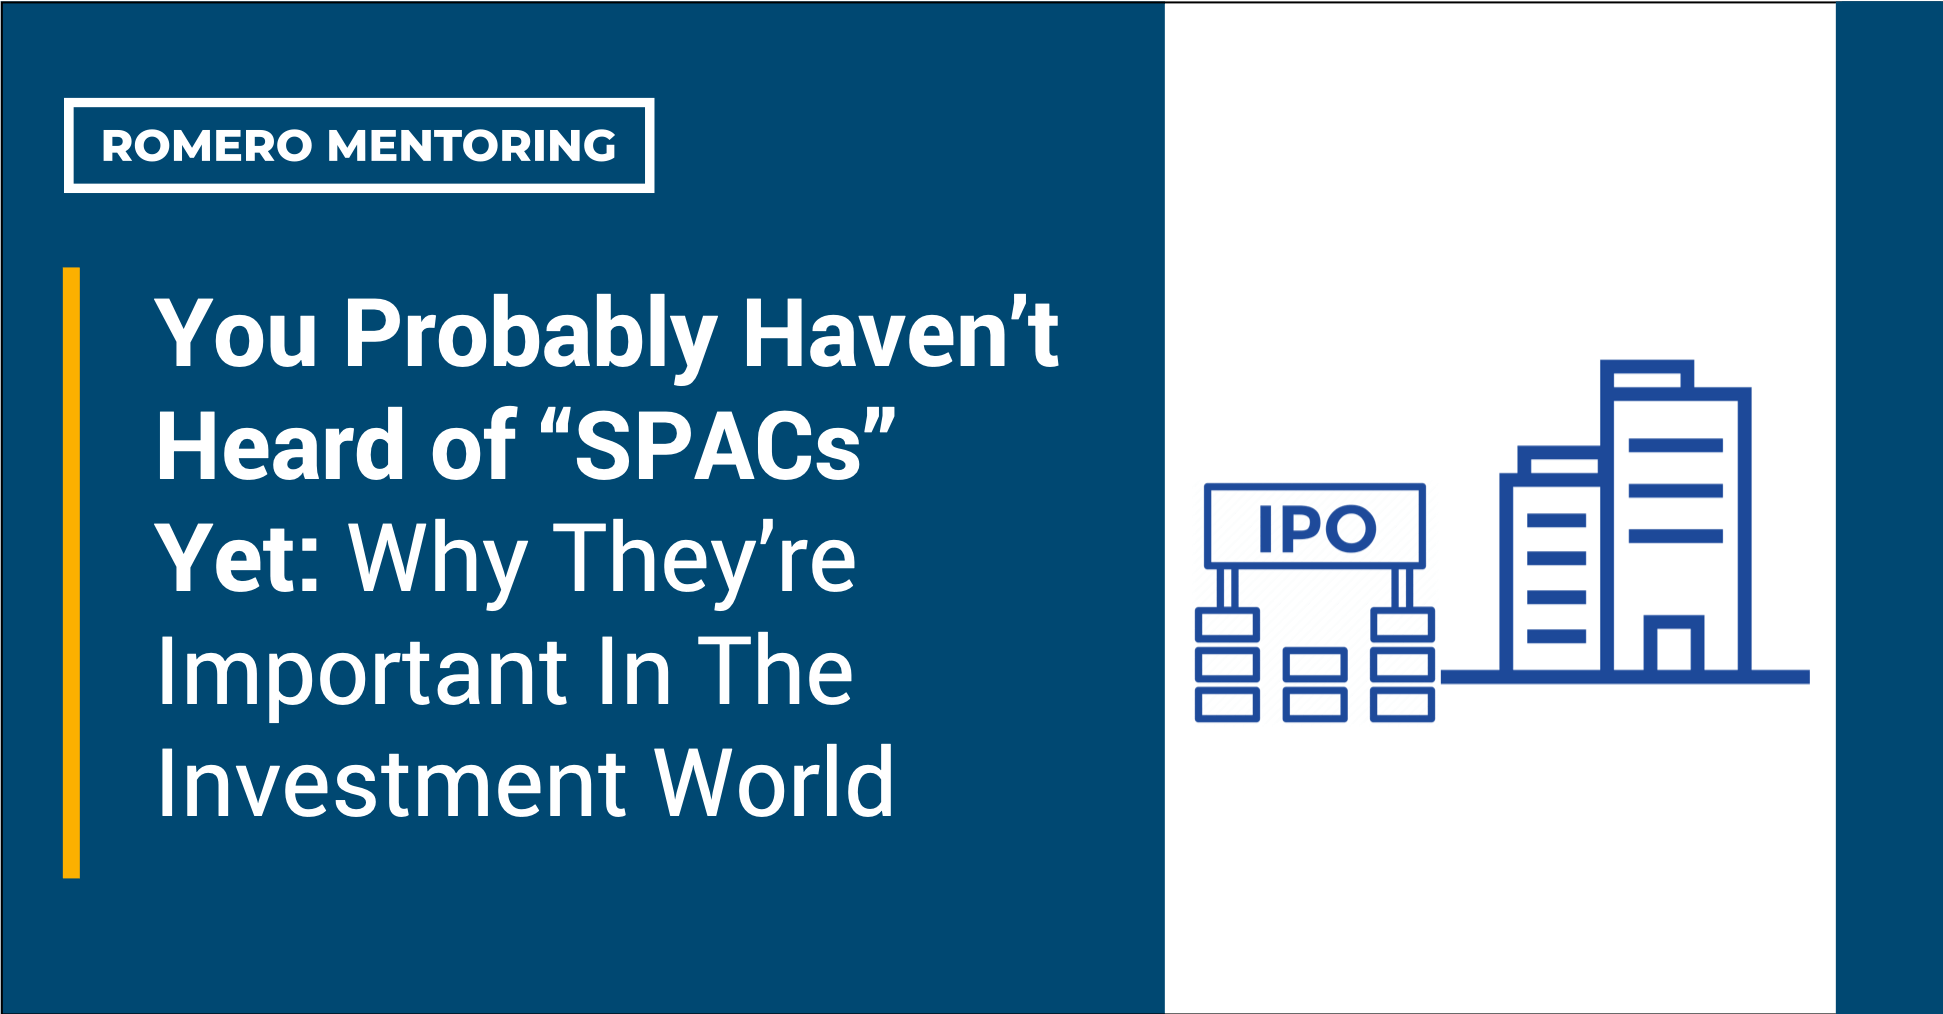 You Probably Haven’t Heard of “SPACs” Yet: Why They’re Important In The Investment World